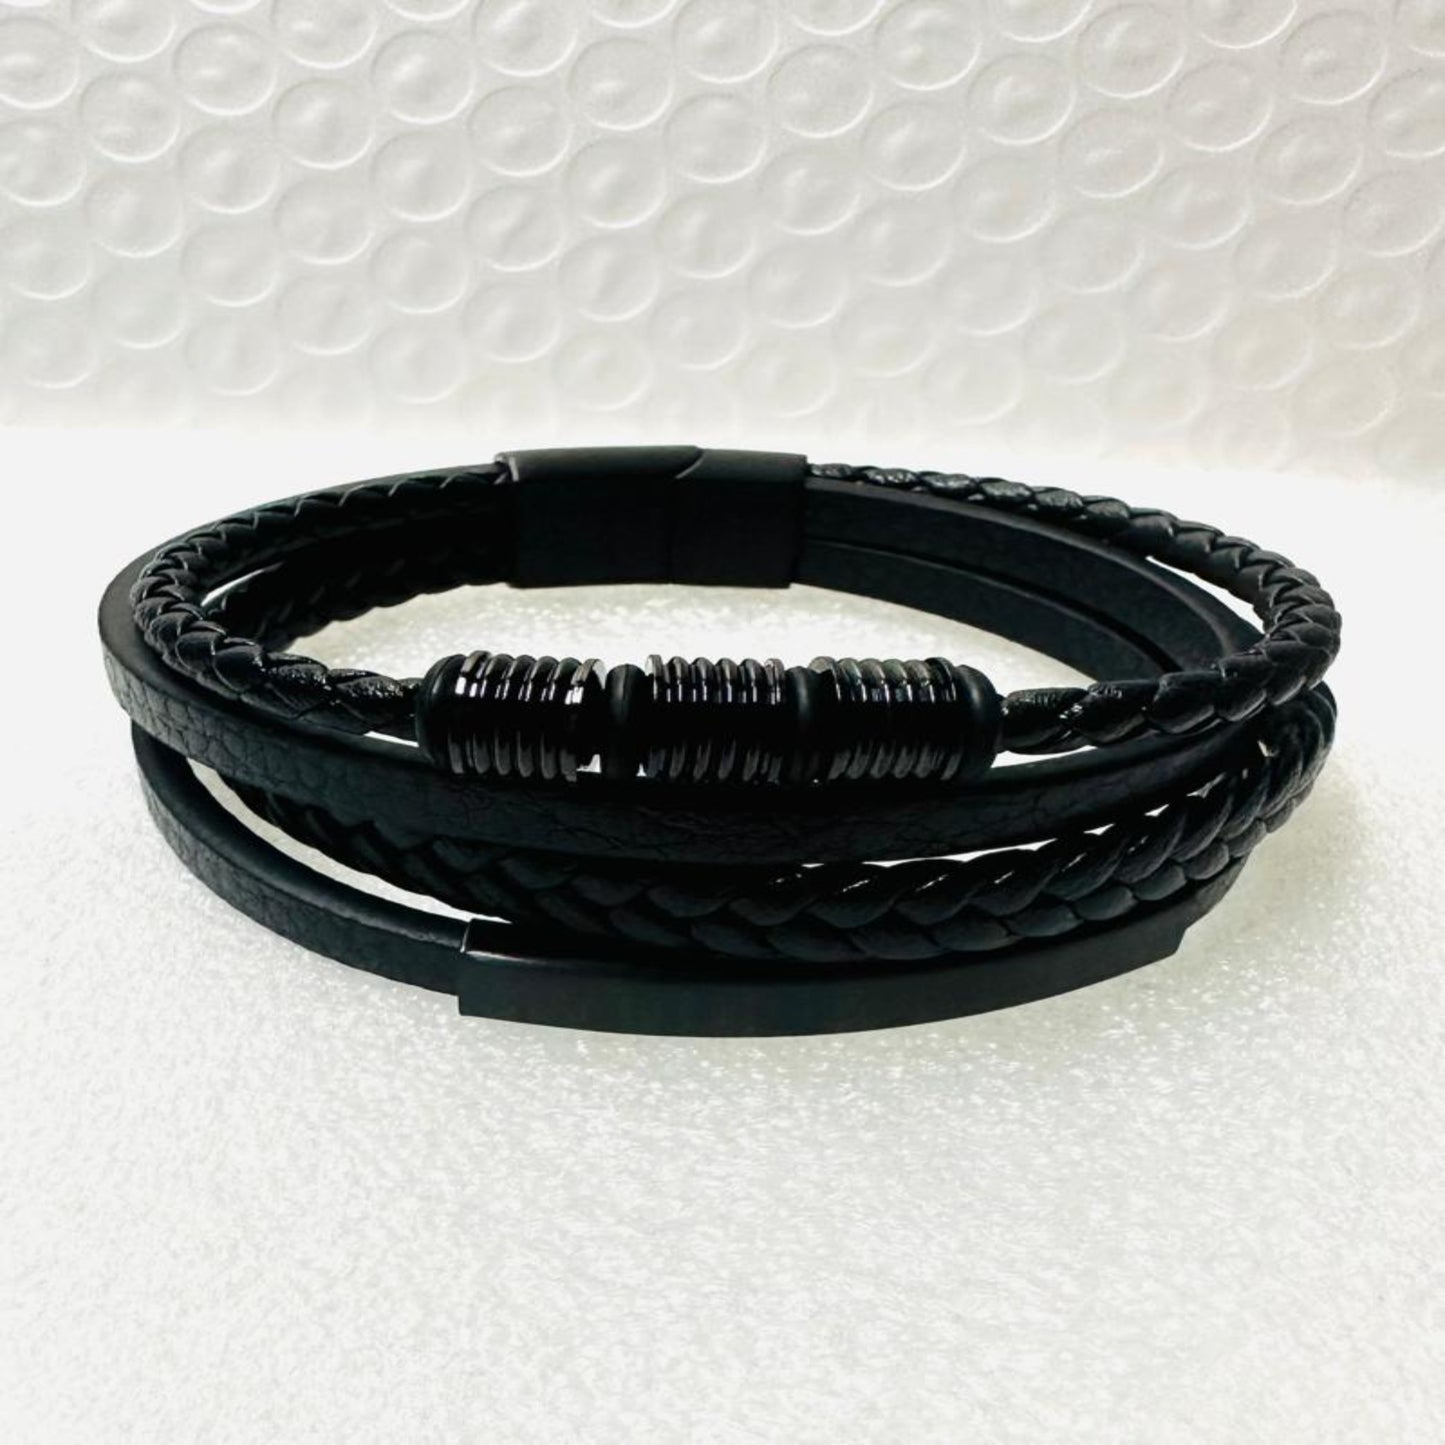 JACK Stainless Steel Leather Bangle For Men